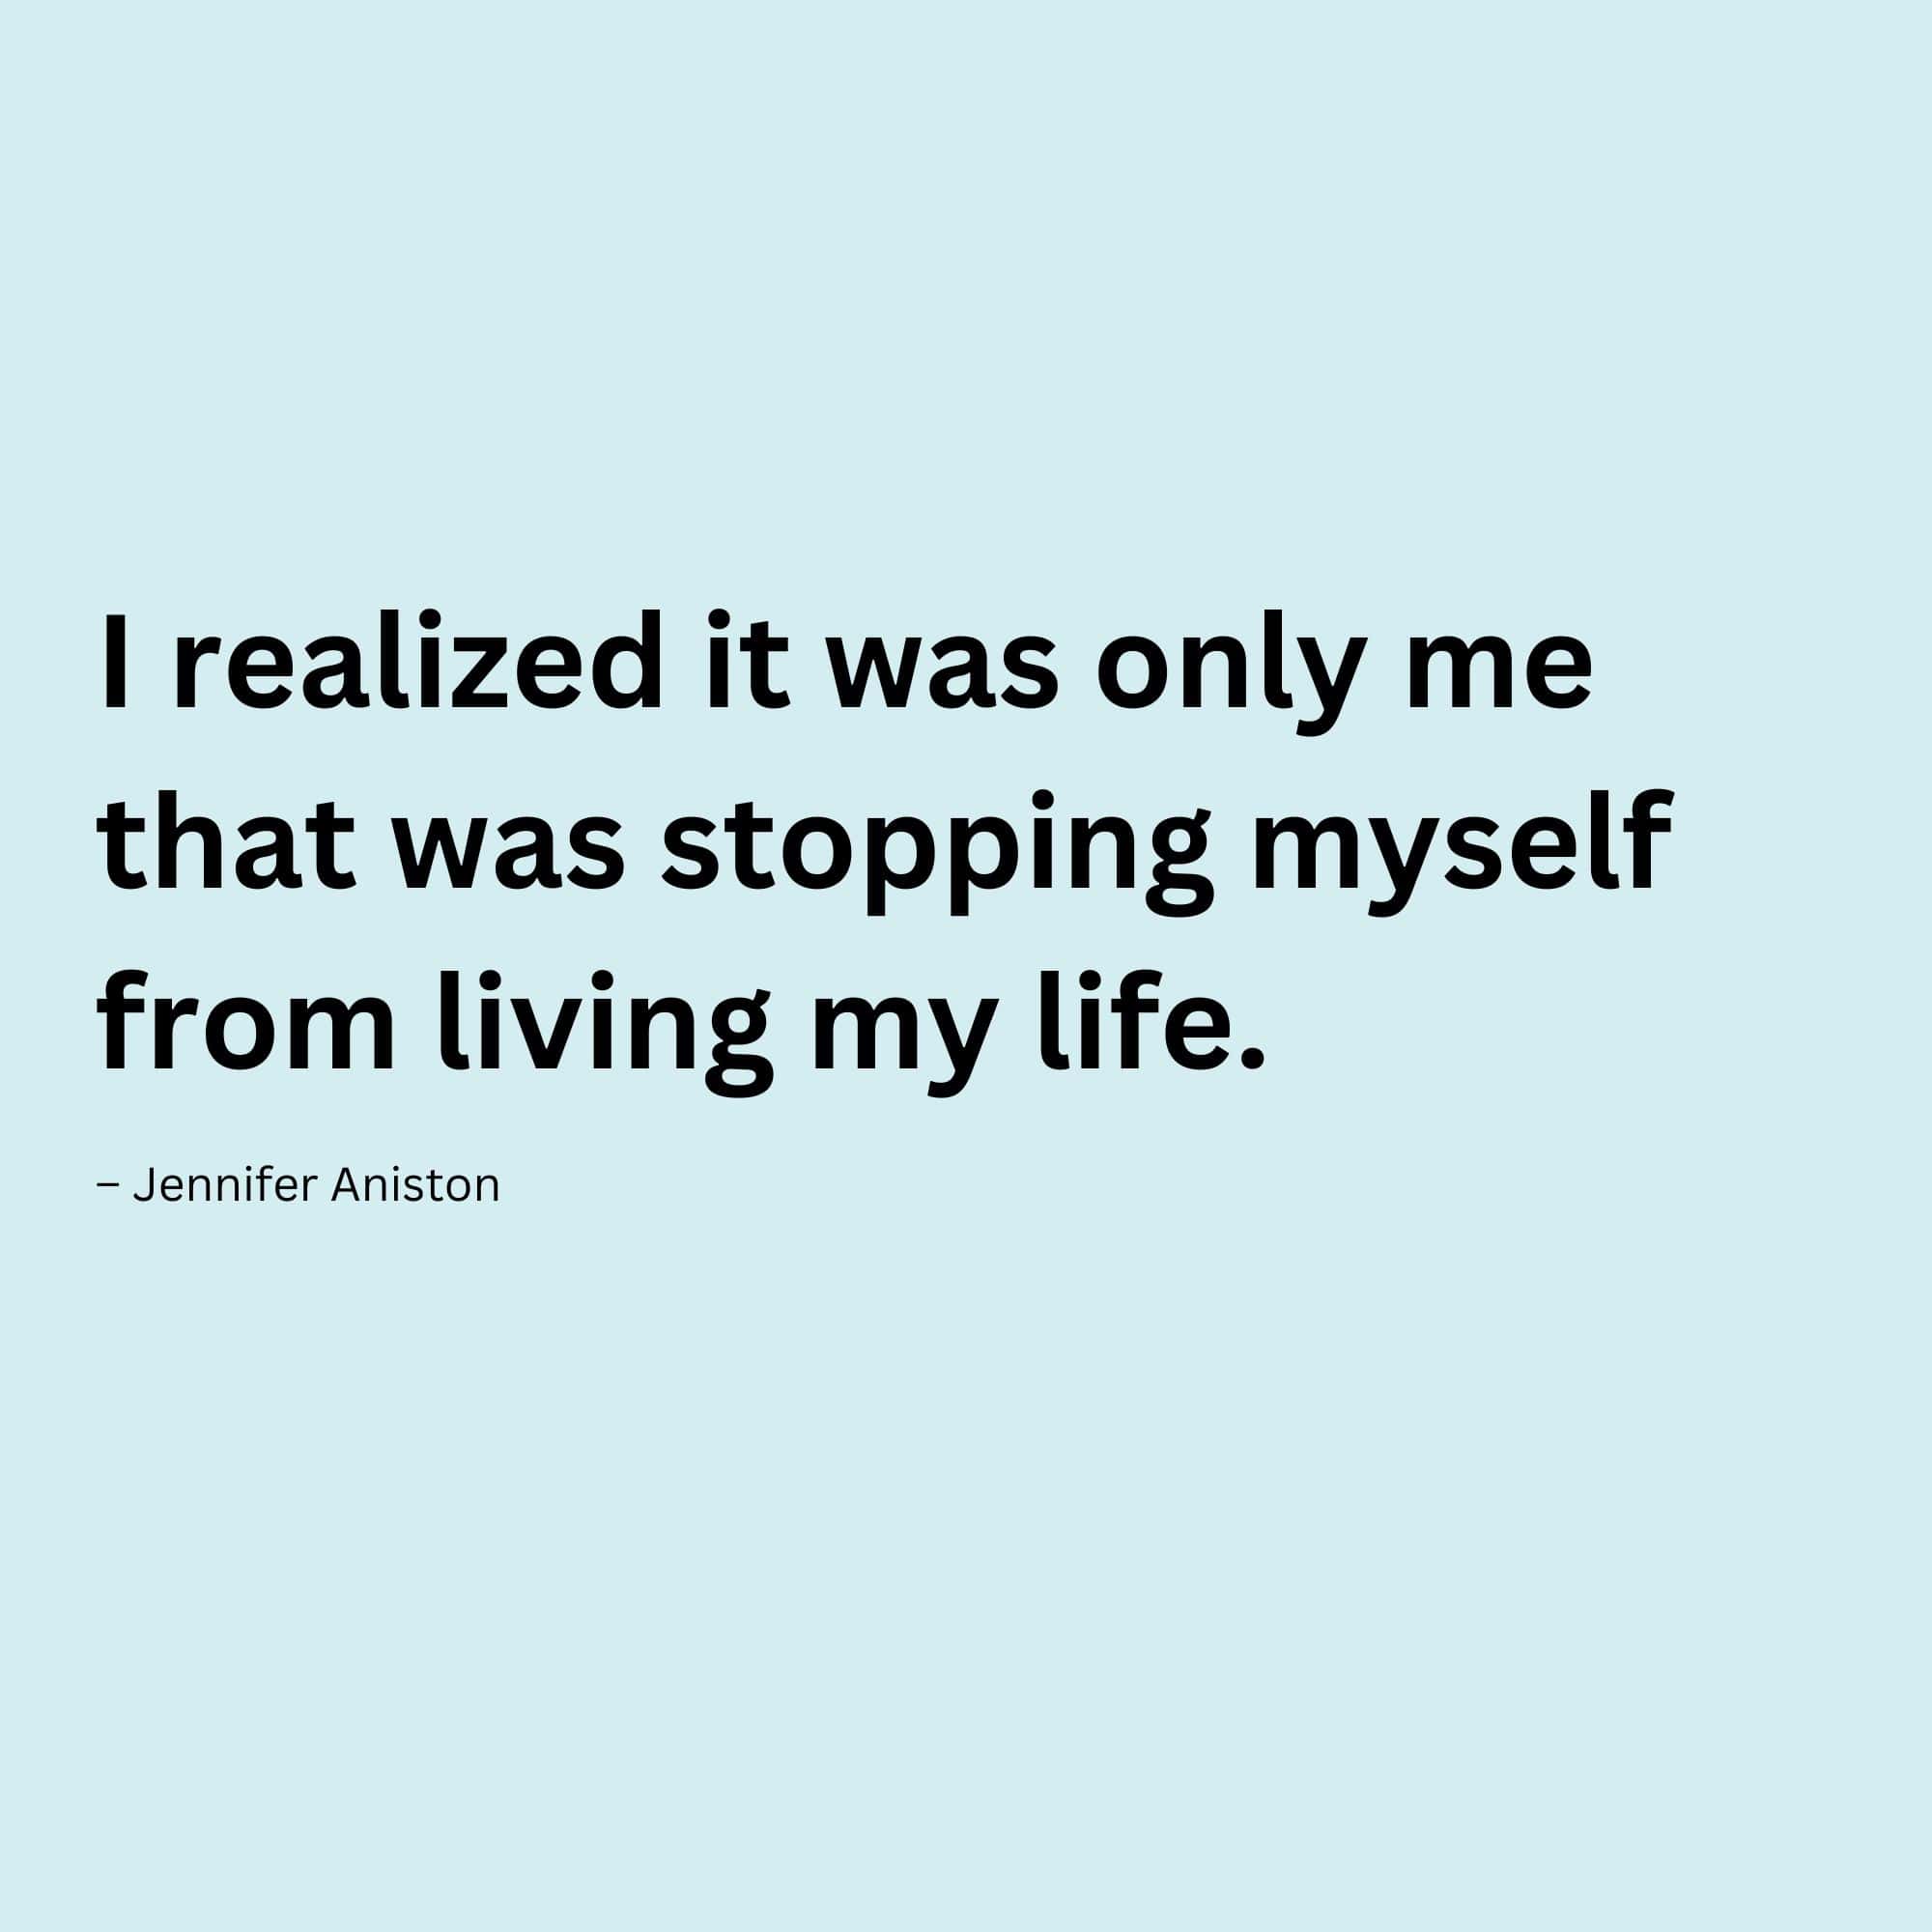 “I realized it was only me that was stopping myself from living my life.” – Jennifer Aniston